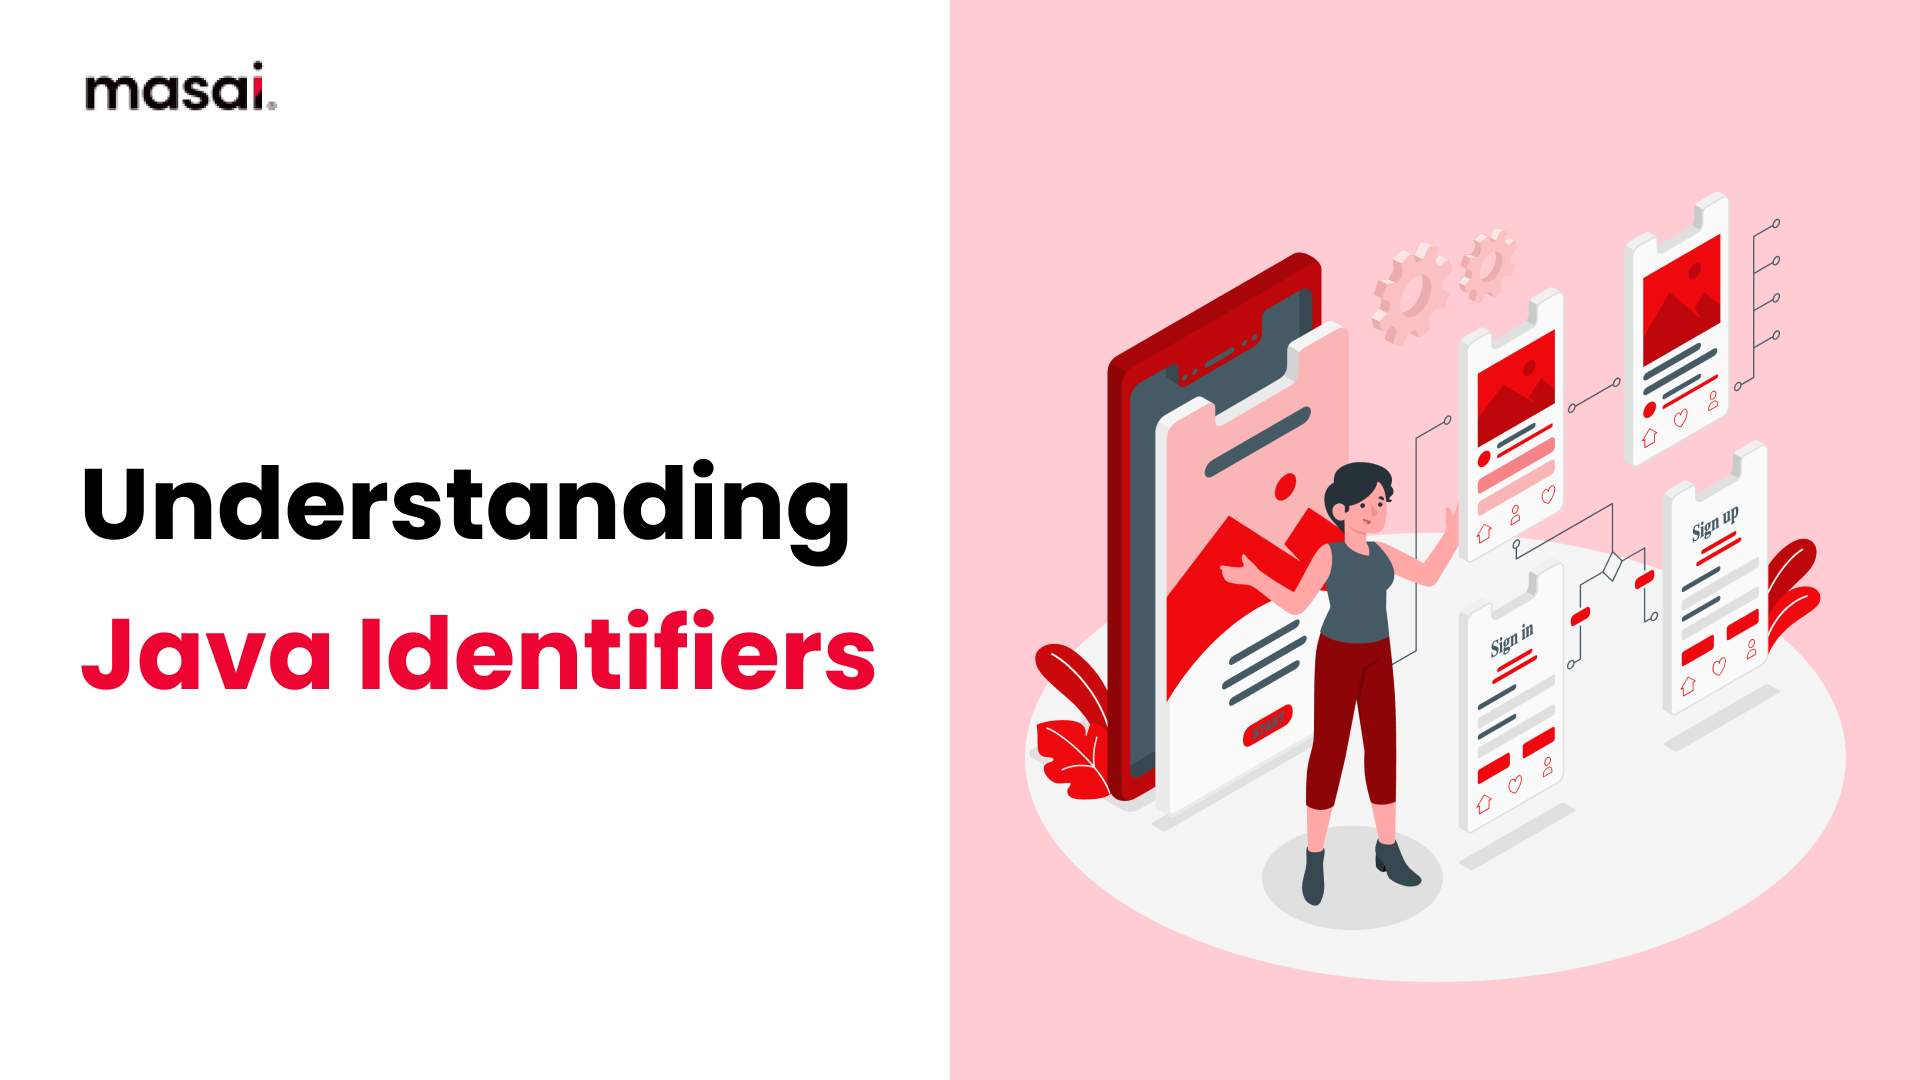 What are Java identifiers